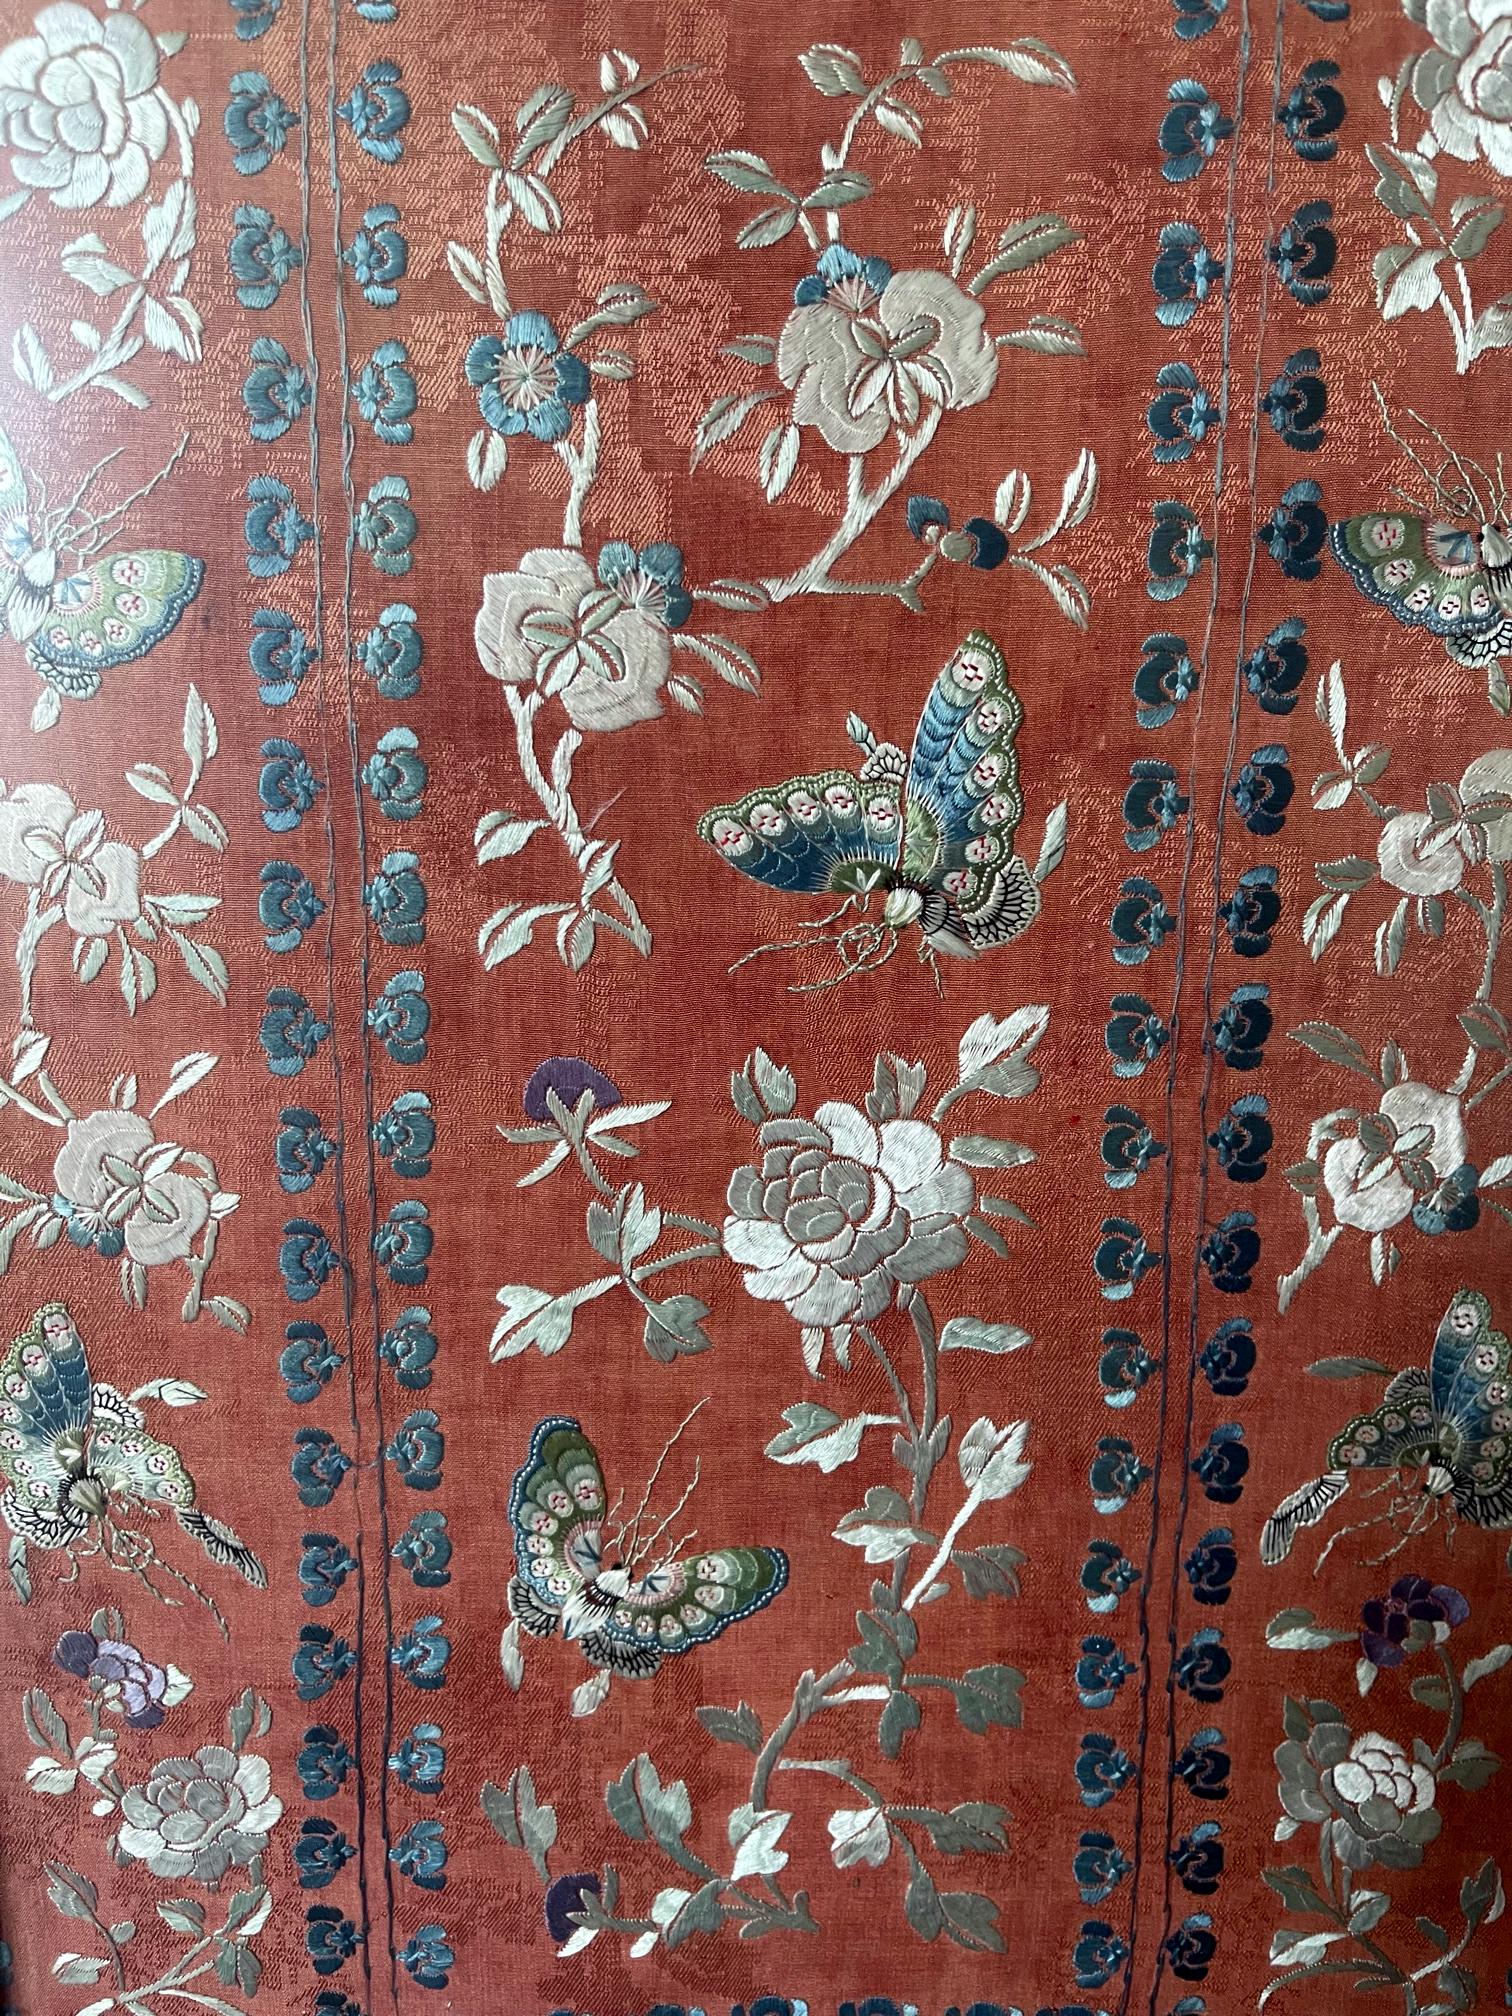 Exhibited Framed Fine Chinese Embroidery Silk Panel Qing Dynasty For Sale 2